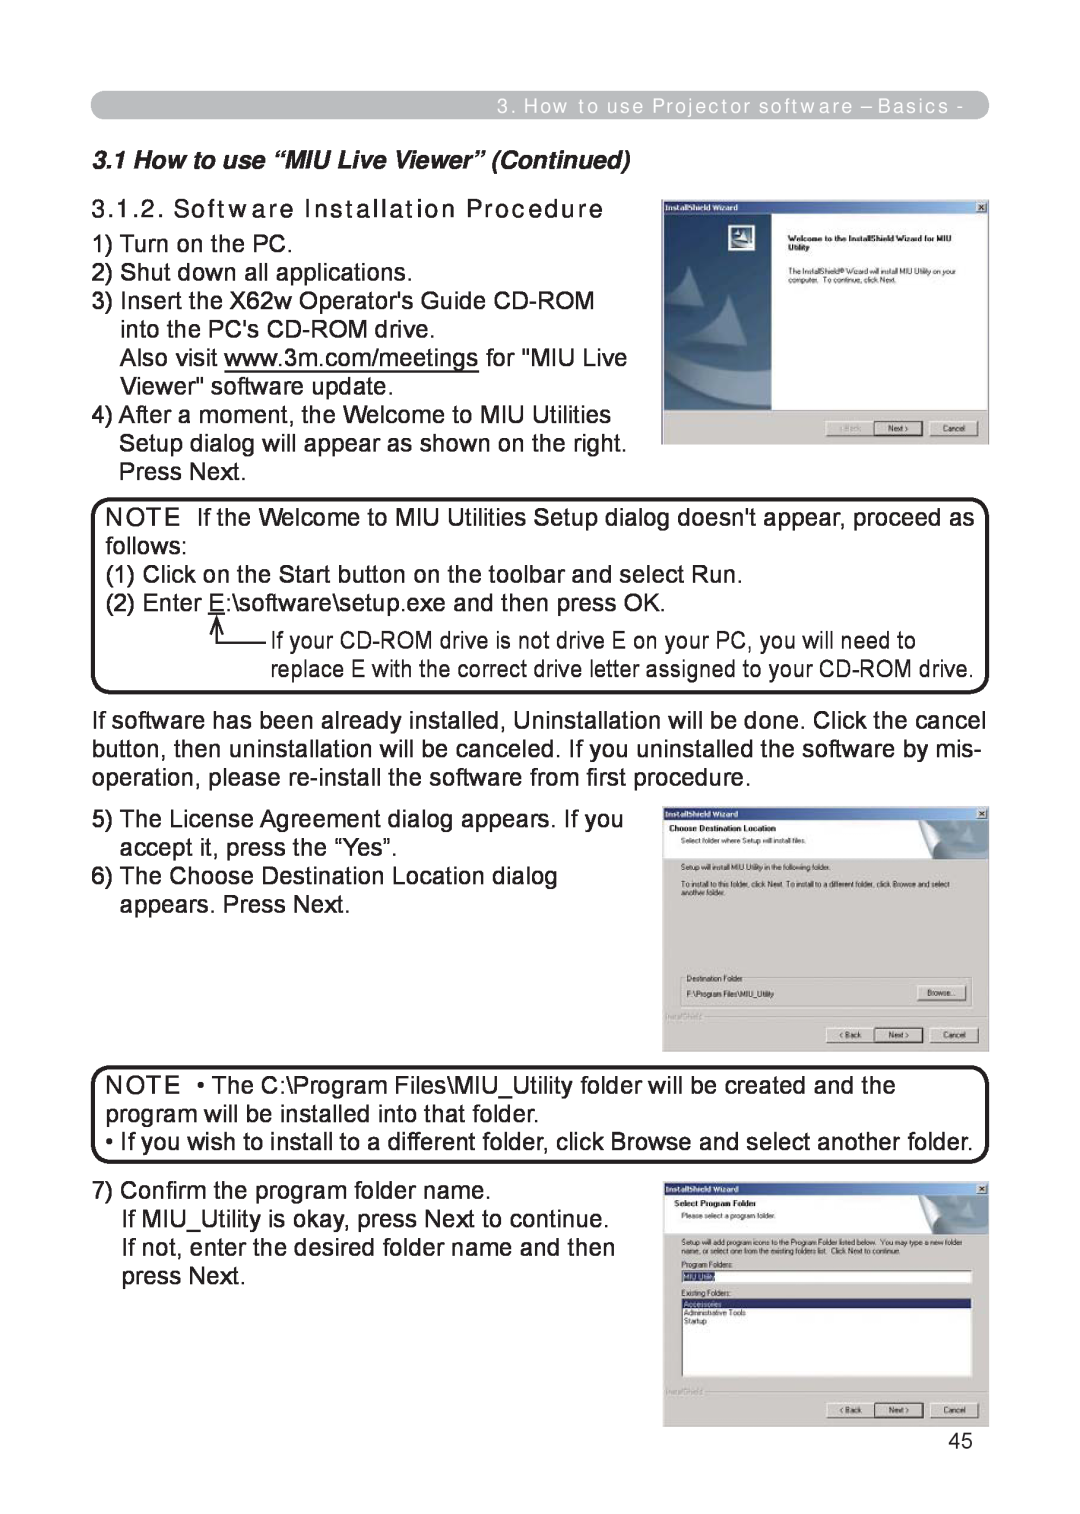 3M X62w manual 3.1How to use “MIU Live Viewer” Continued, Software Installation Procedure 